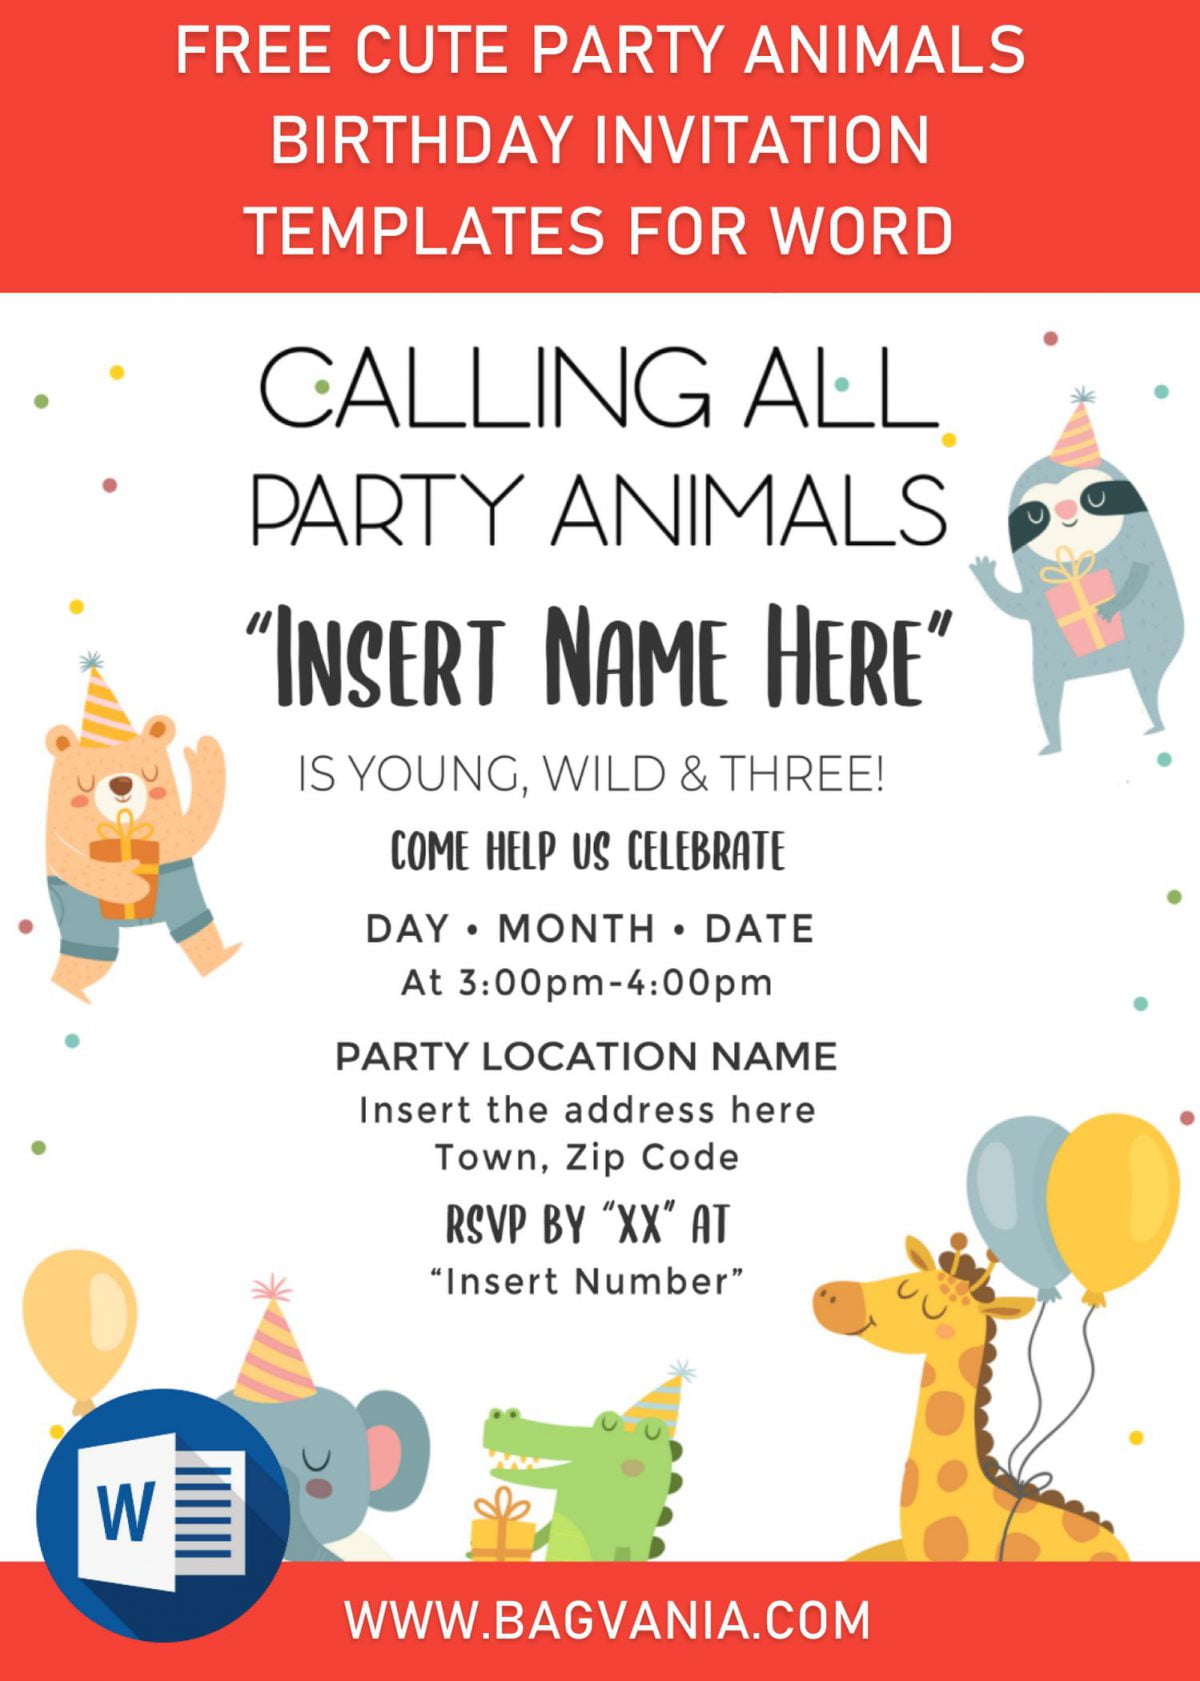 Free Cute Party Animals Birthday Invitation Templates For Word